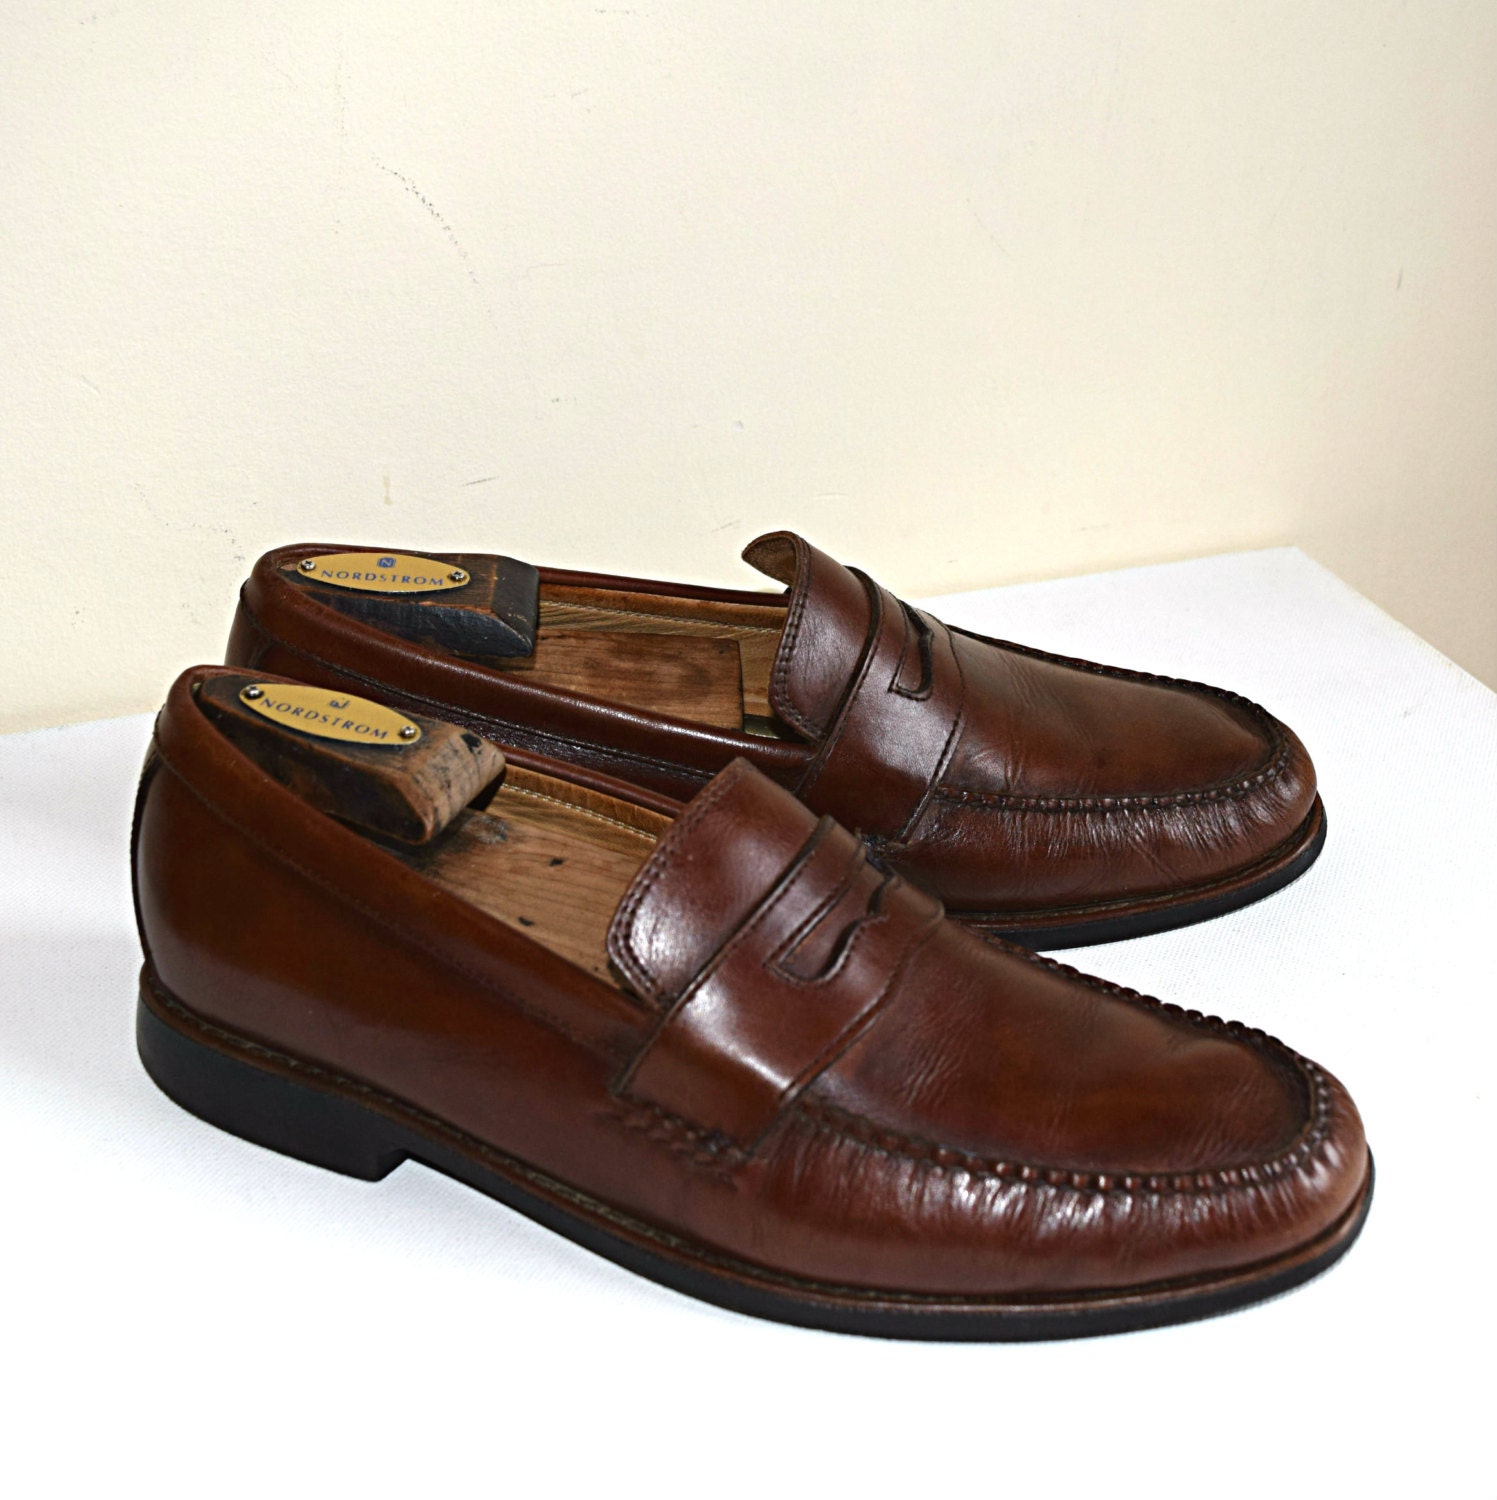 8.5 M Men's Johnston & Murphy Brown Loafer Shoes by Insideredo